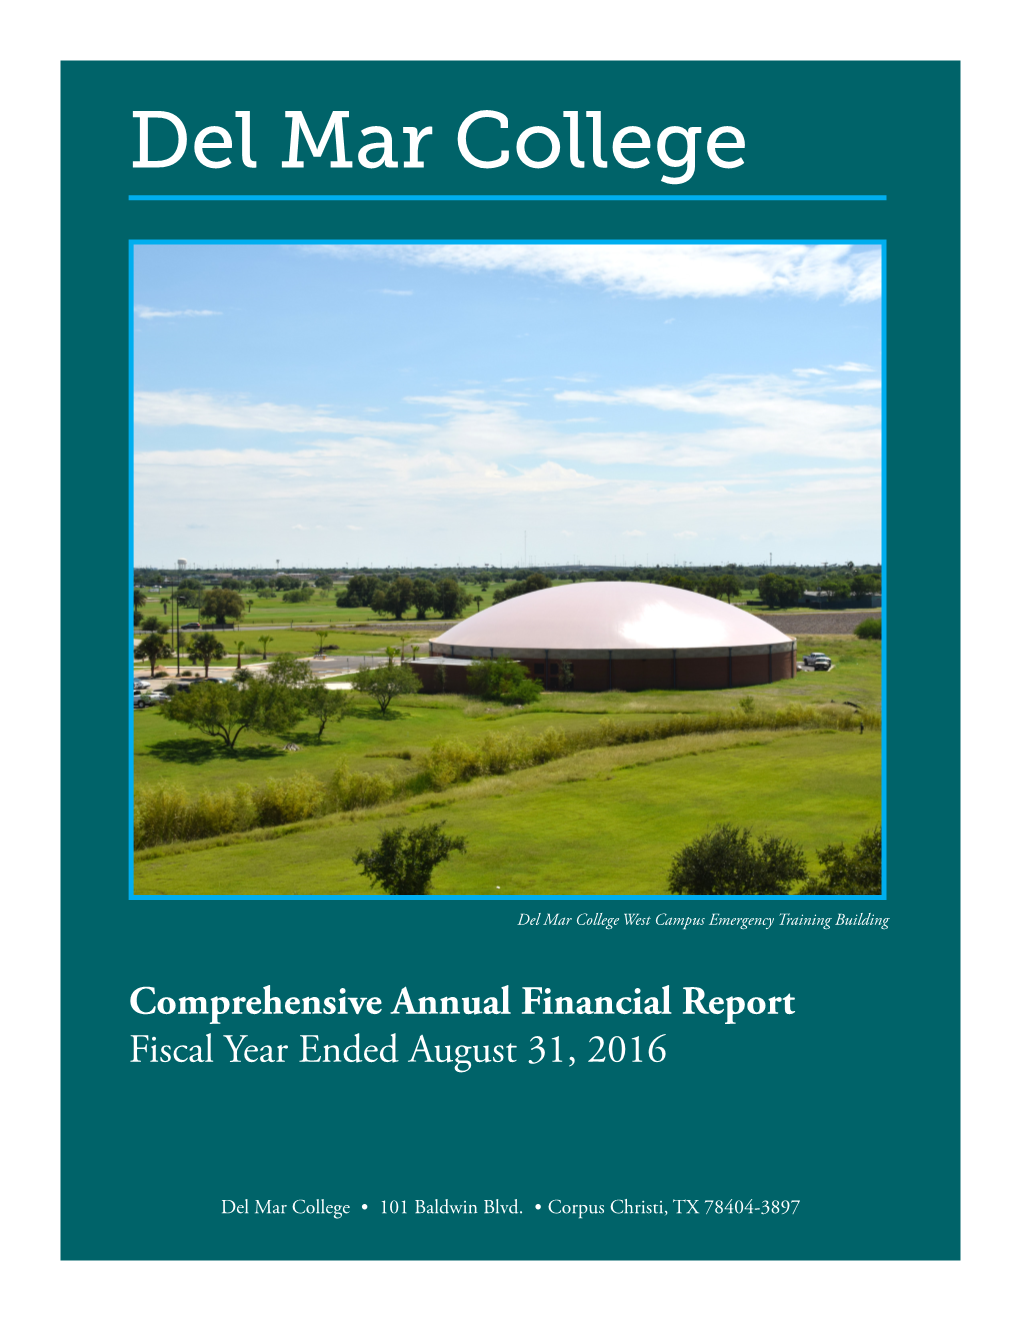 Comprehensive Annual Financial Report Fiscal Year Ended August 31, 2016